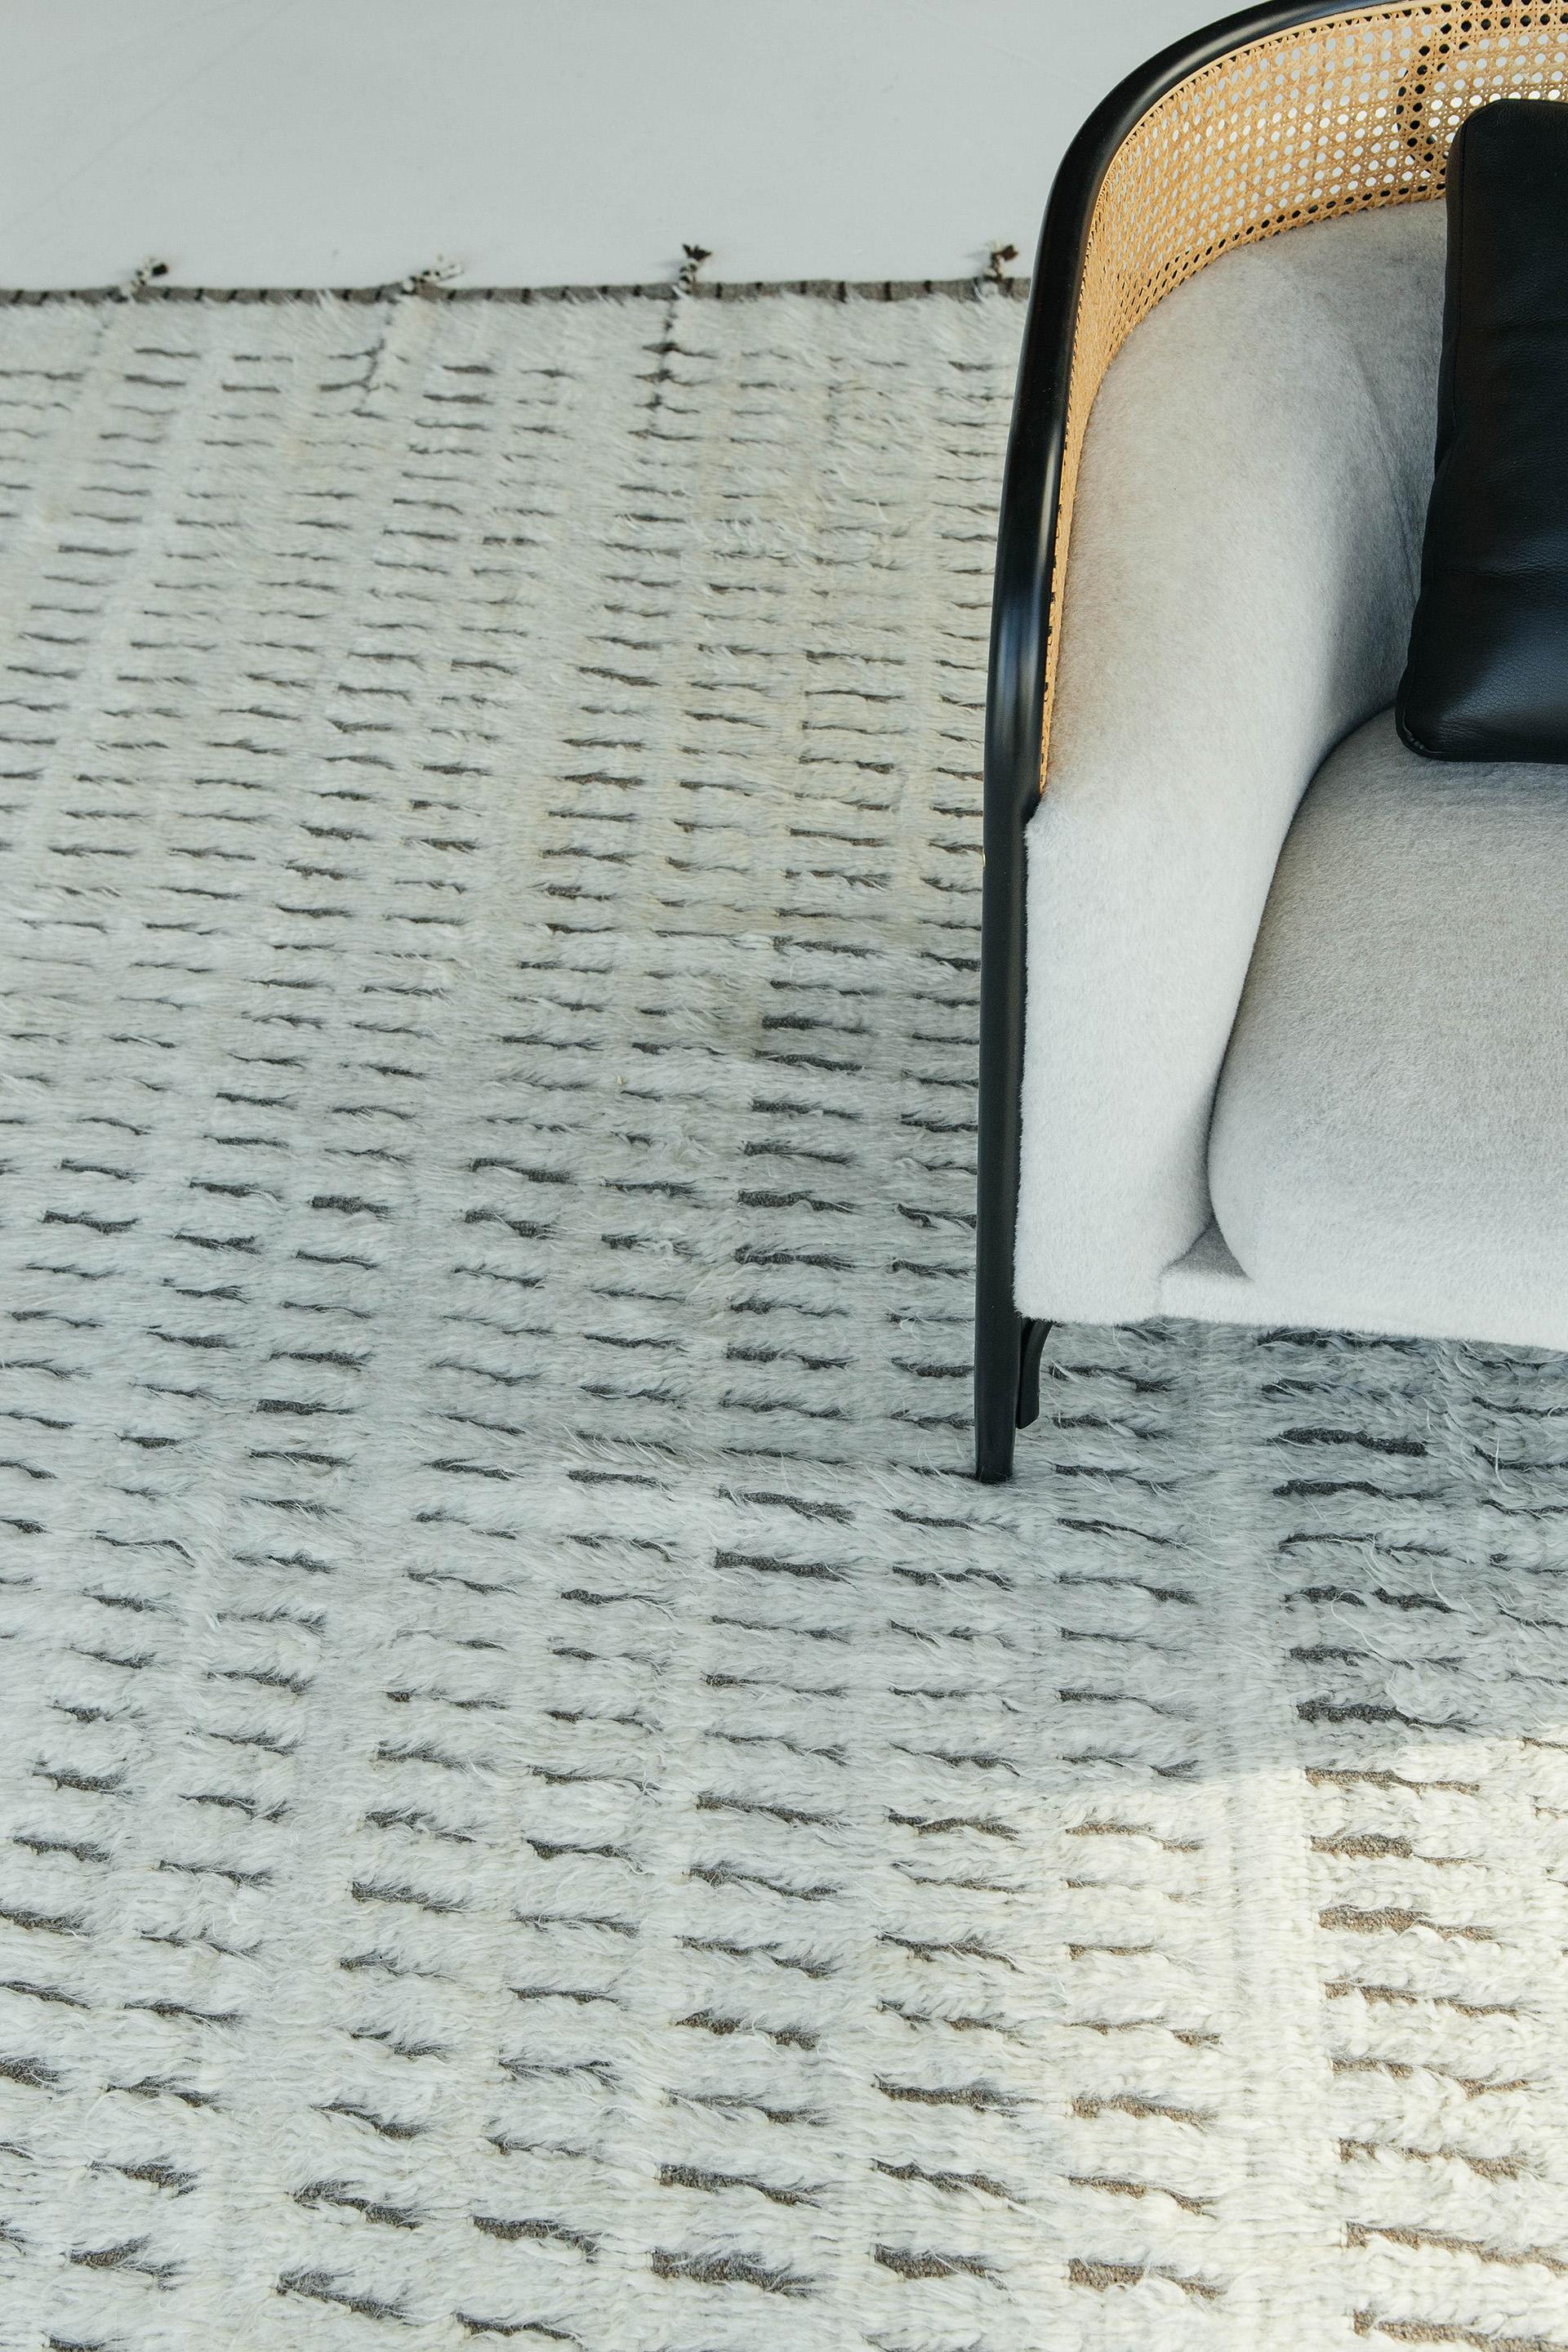 The signature Collection of California. Handwoven luxurious wool rug, made of timeless design elements and neutral earth tones with the perfect shade of ivory. Natural flat weave runs around the border with tasseled ends making this piece from